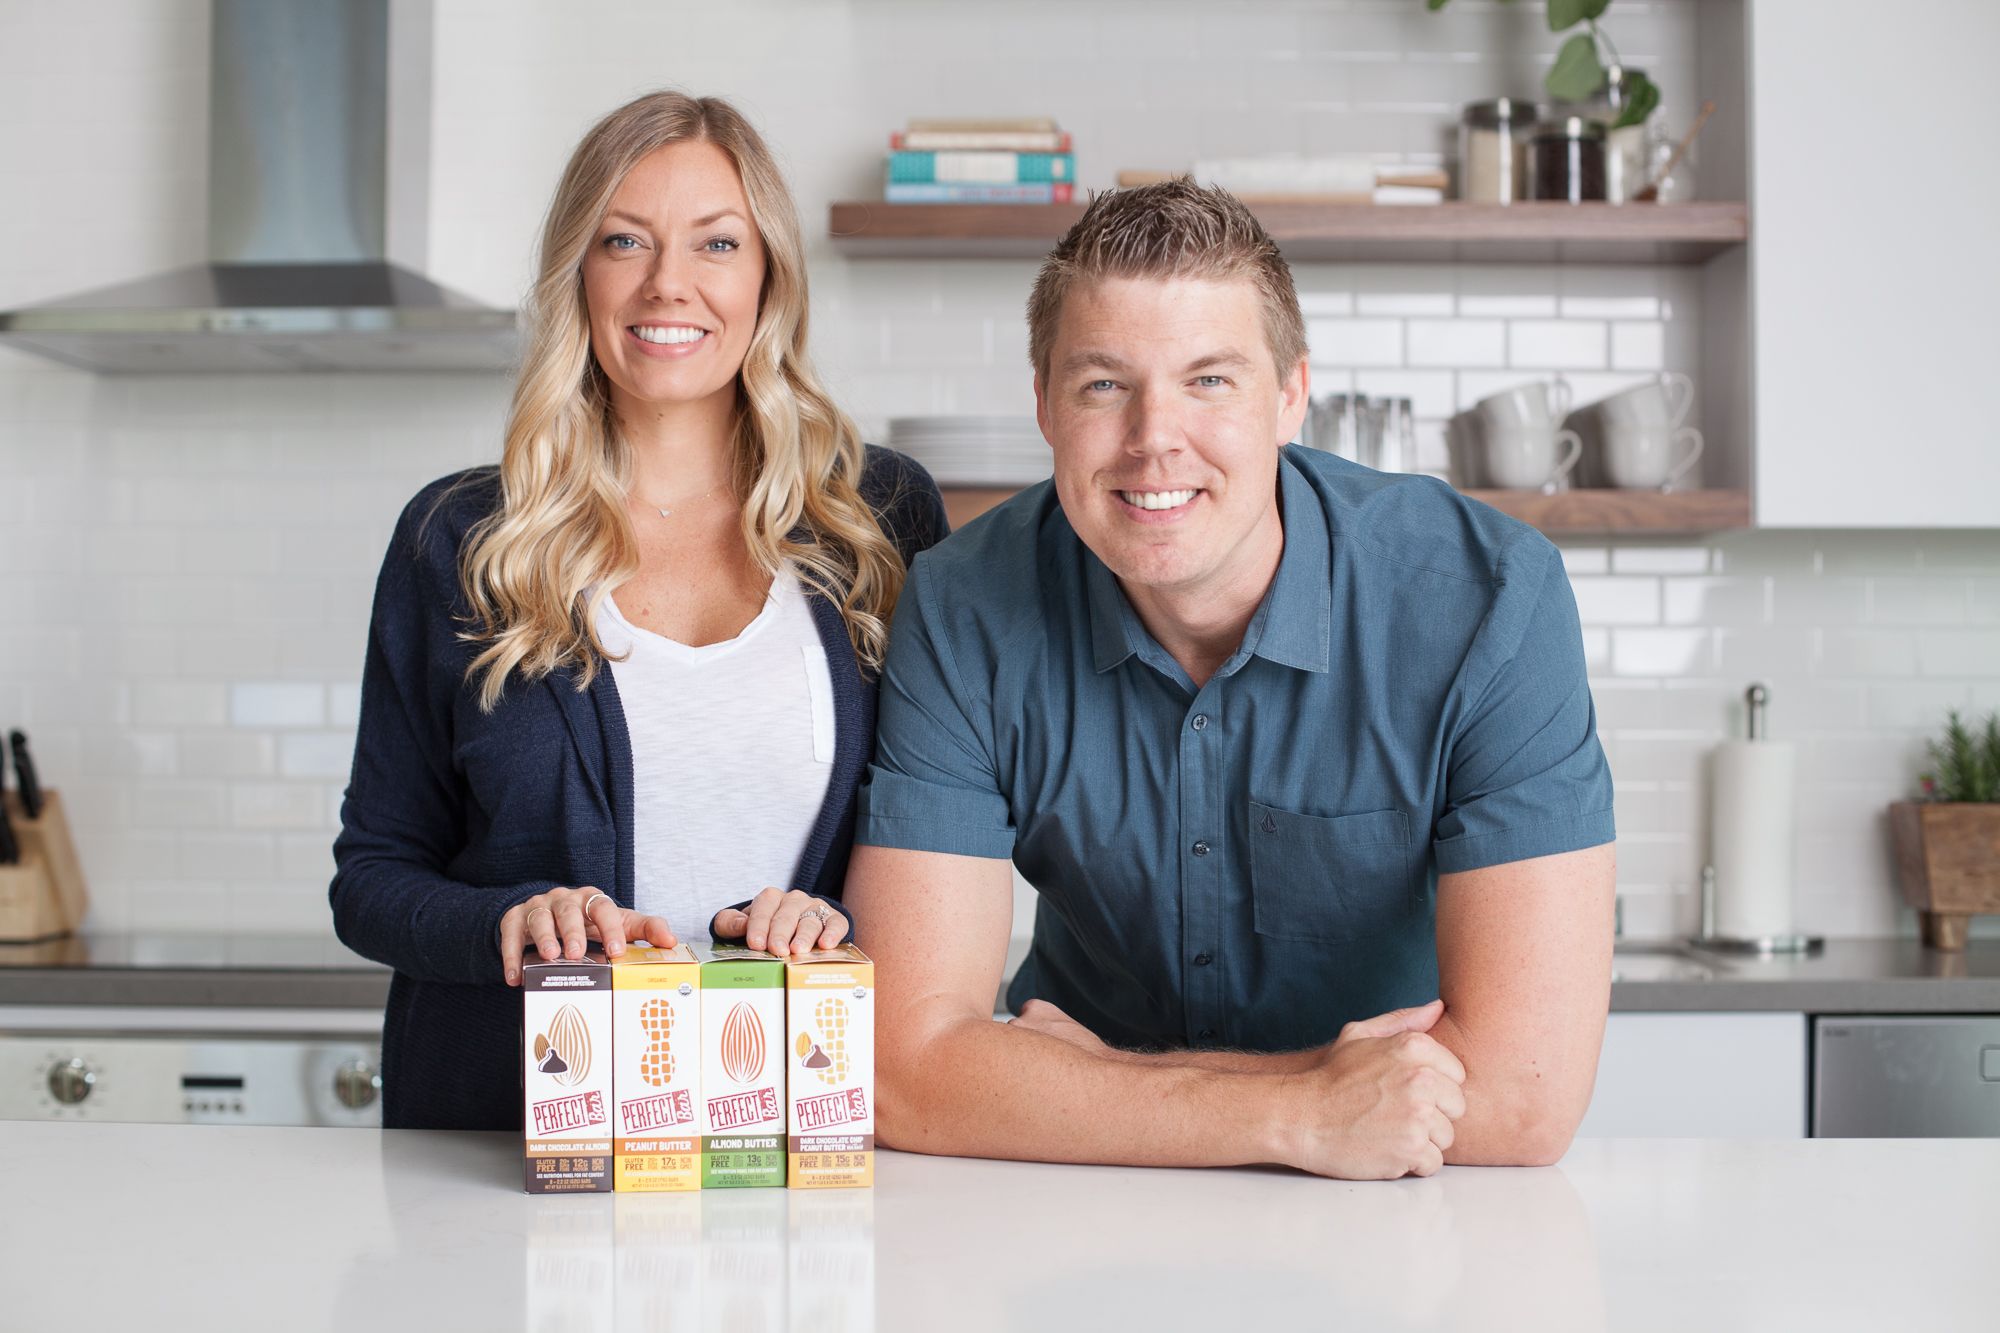 These Siblings Started a Refrigerated Protein Bar Company to Support Their Large Family, and Now Their Products Are Sold in 20,000 Stores